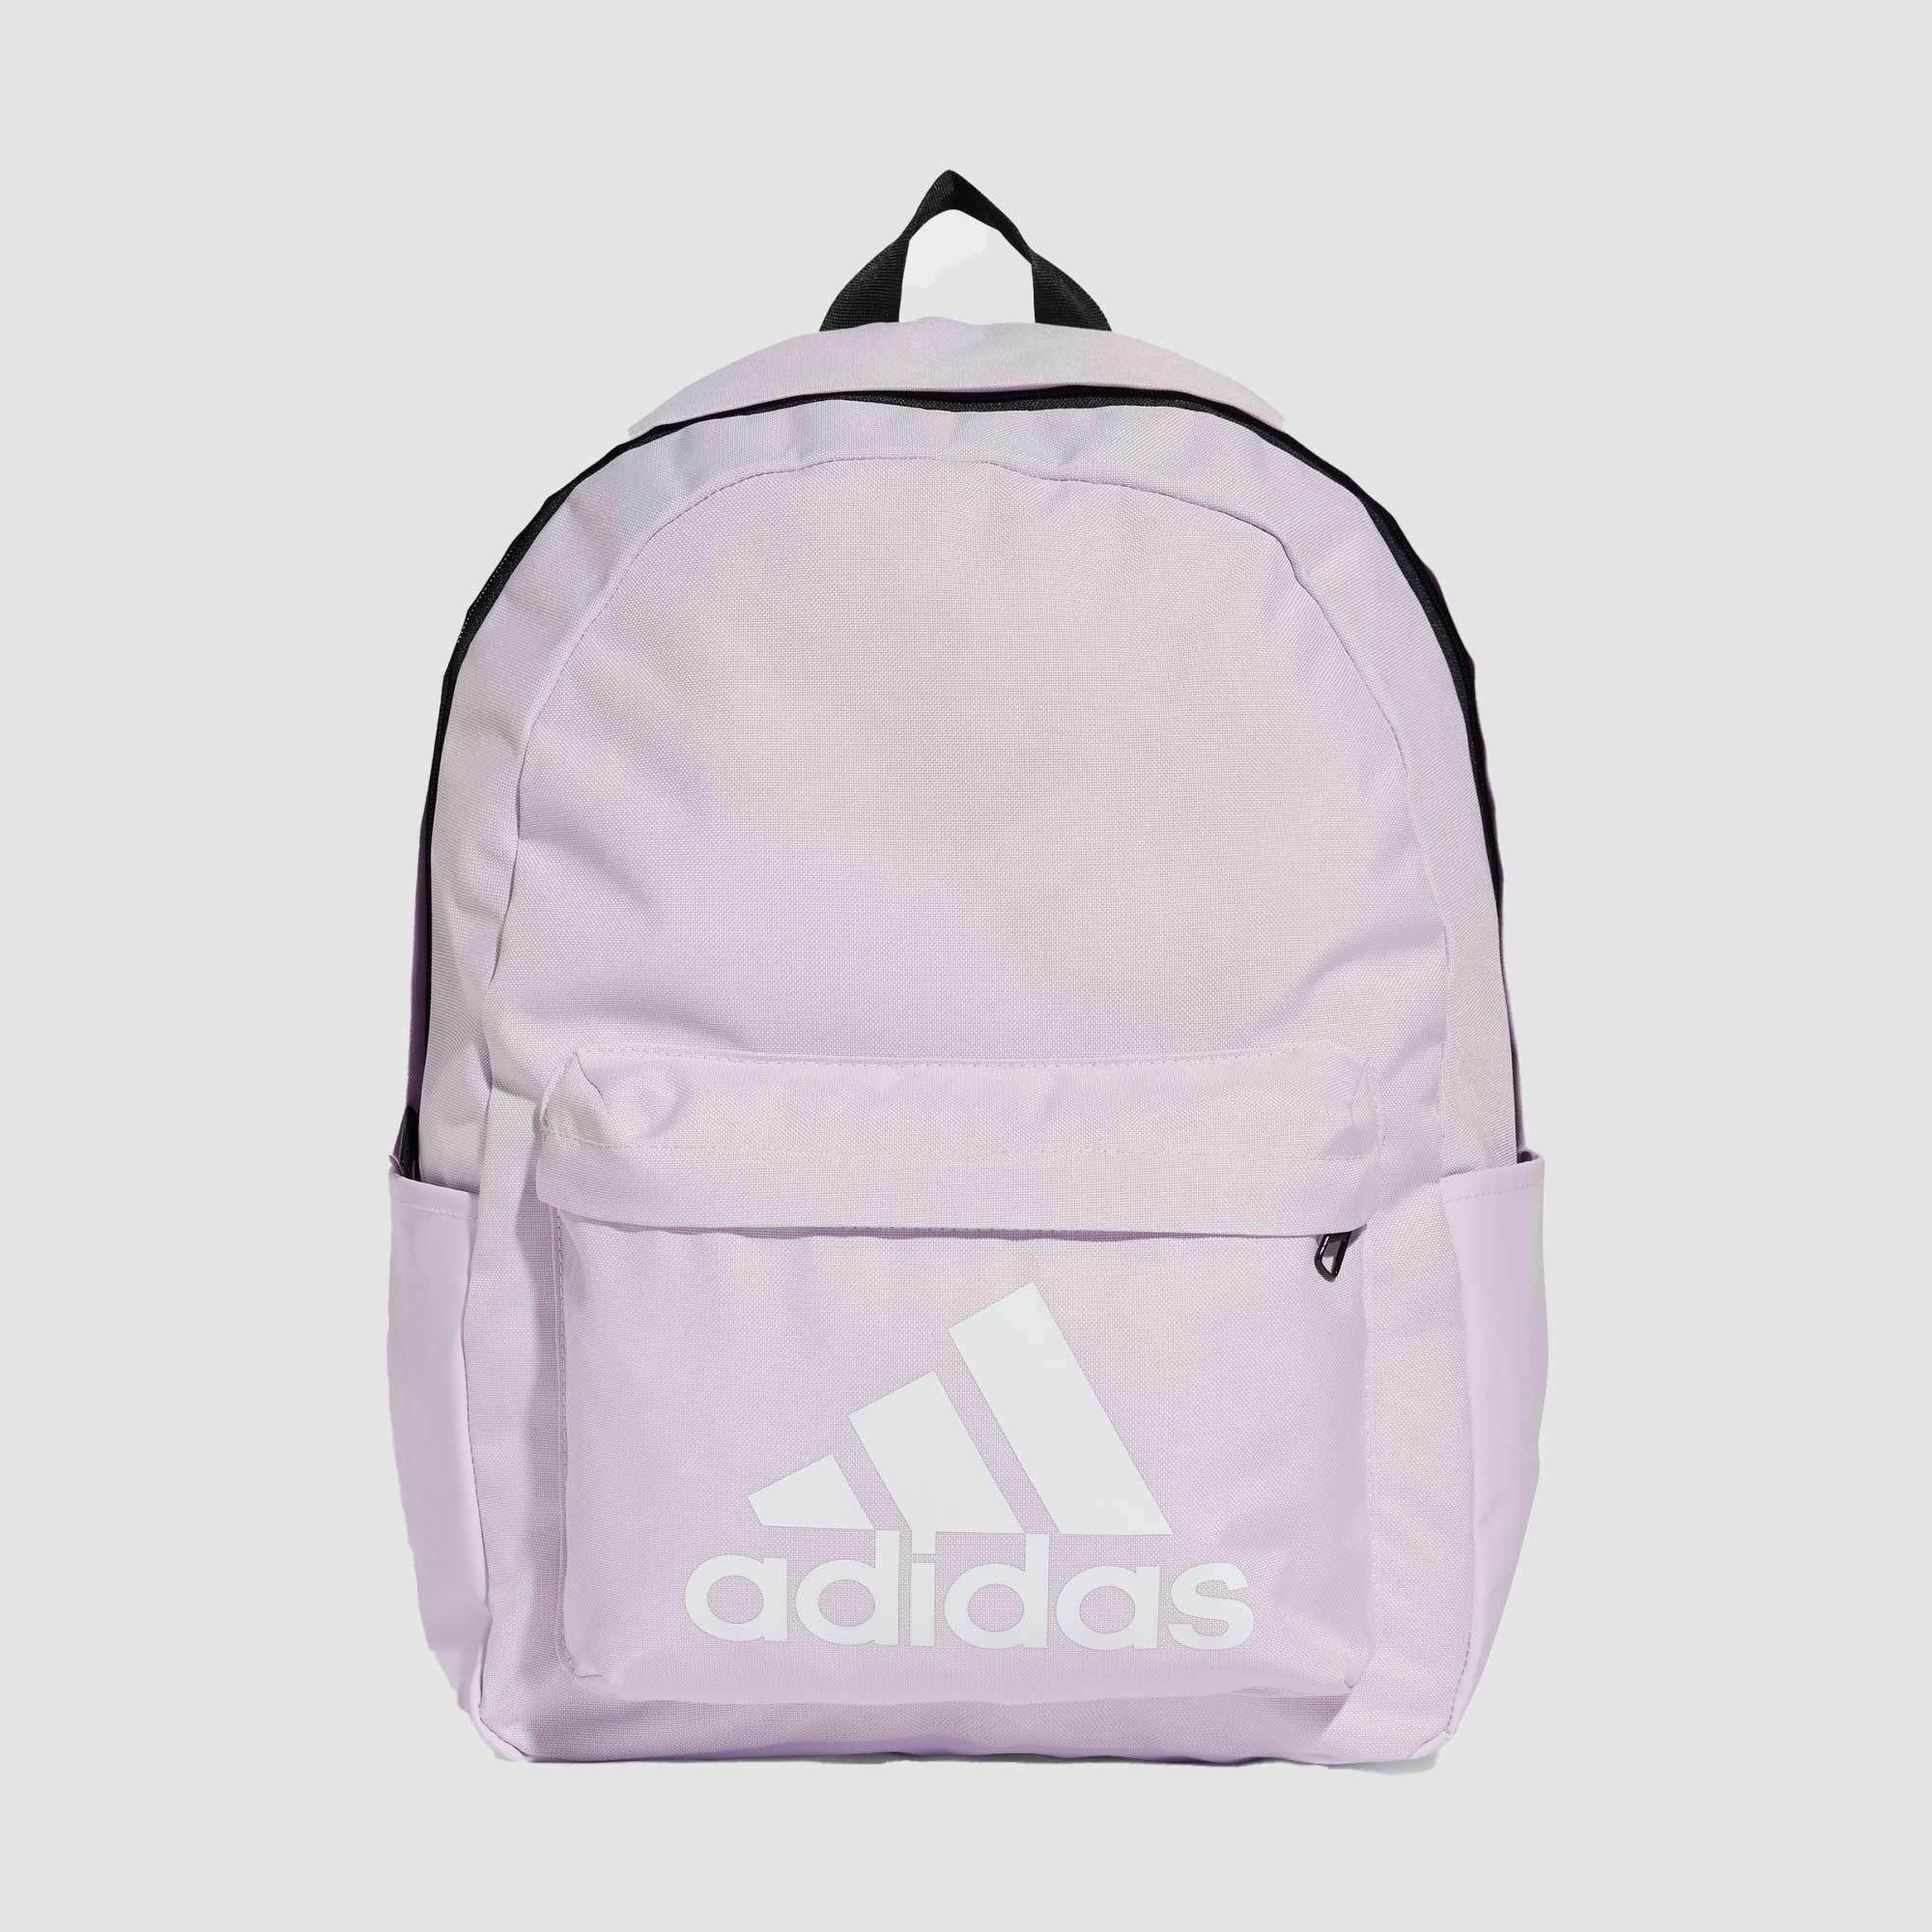 adidas Classic Badge of Sport Backpack Lavender/White 27L